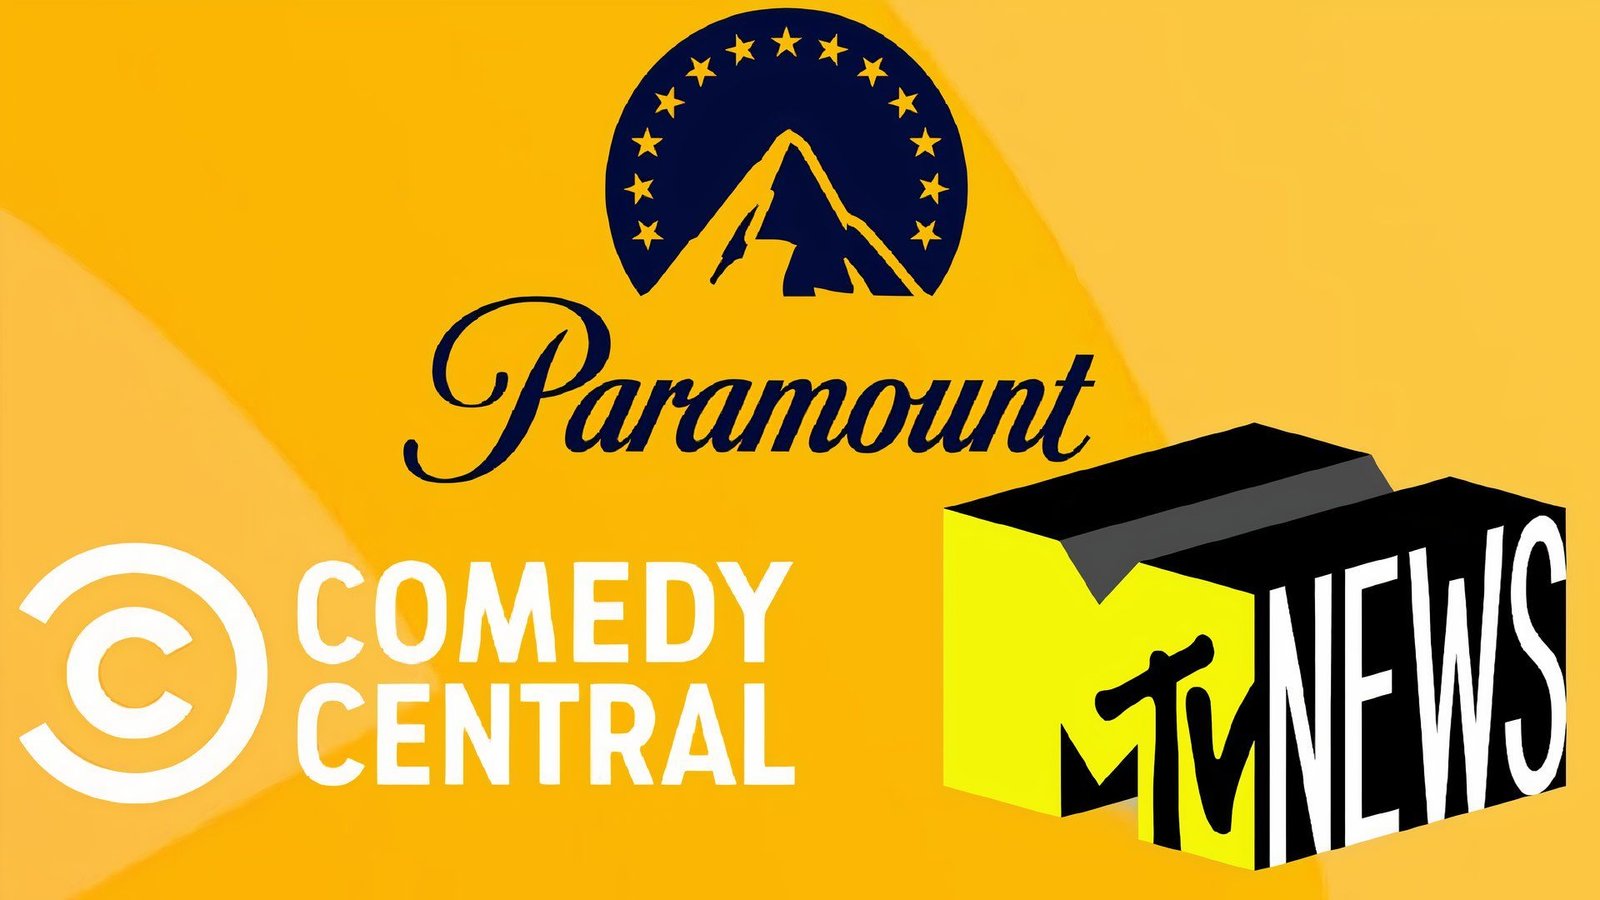 Online Archives of Comedy Central, MTV News.com and More Purged by Paramount Global in Streamlining Move